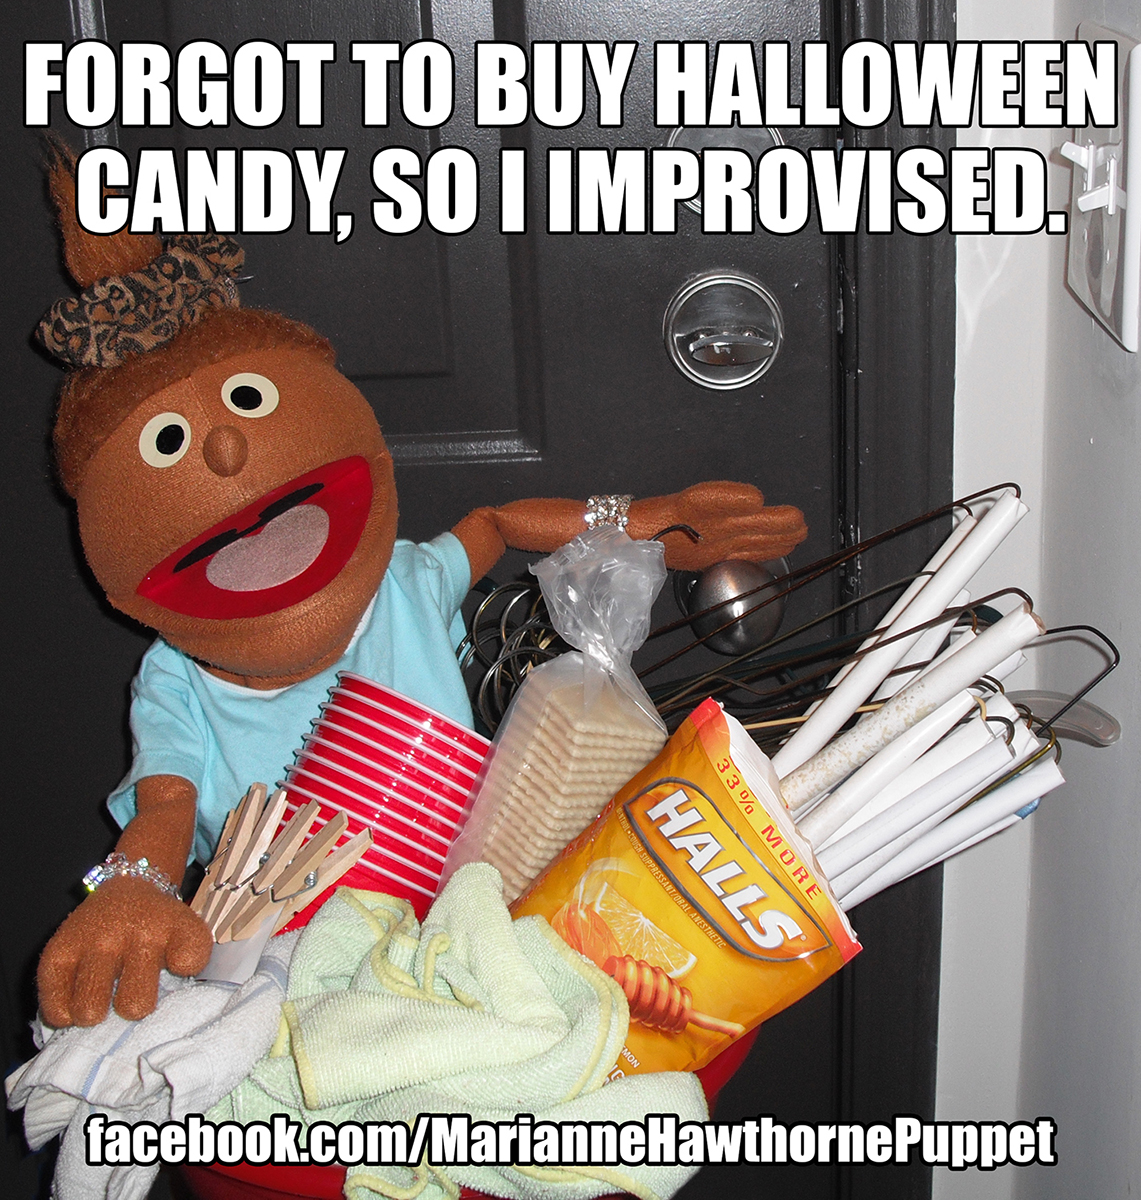 halloween trick or treat meme - Forgot To Buy Halloween Candy, So I Improvised. Halls facebook.comMarianne Hawthorne Puppet